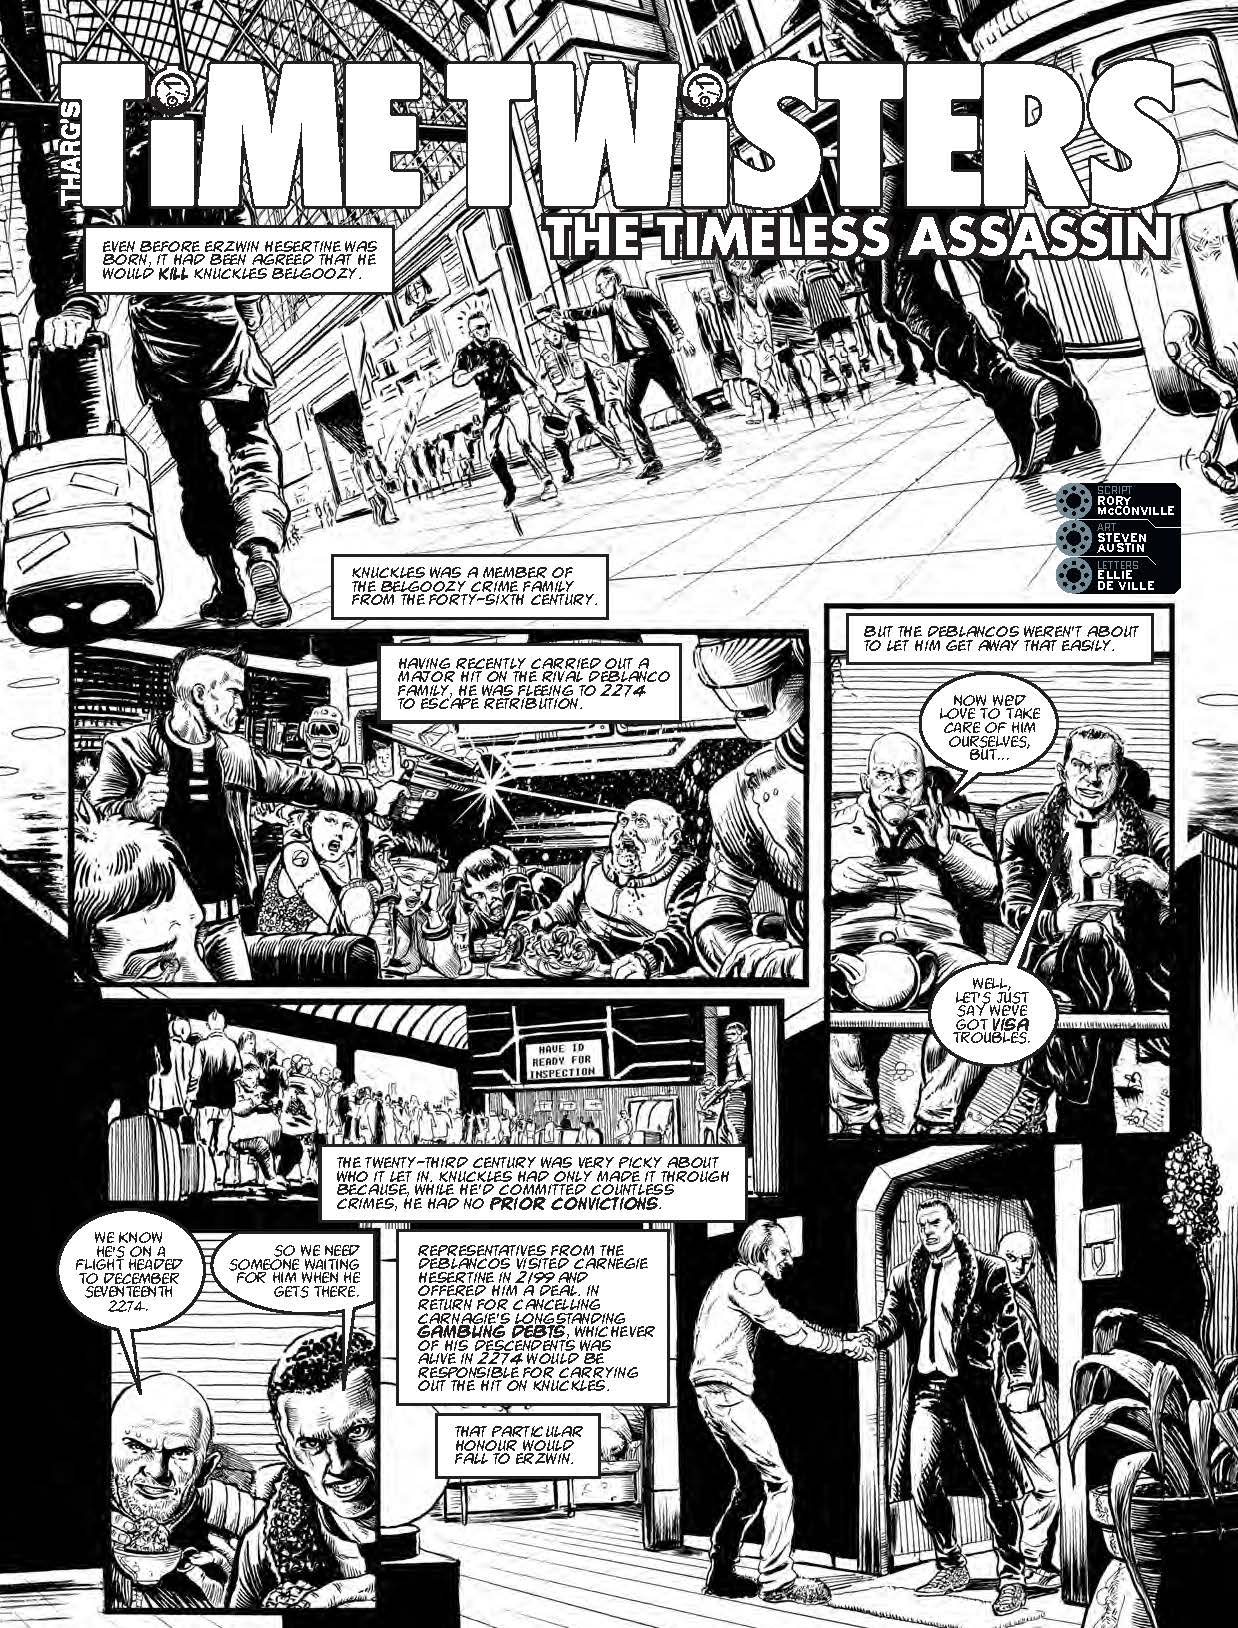 2000AD Prog 1982: "The Timeless Assassin" Page 1